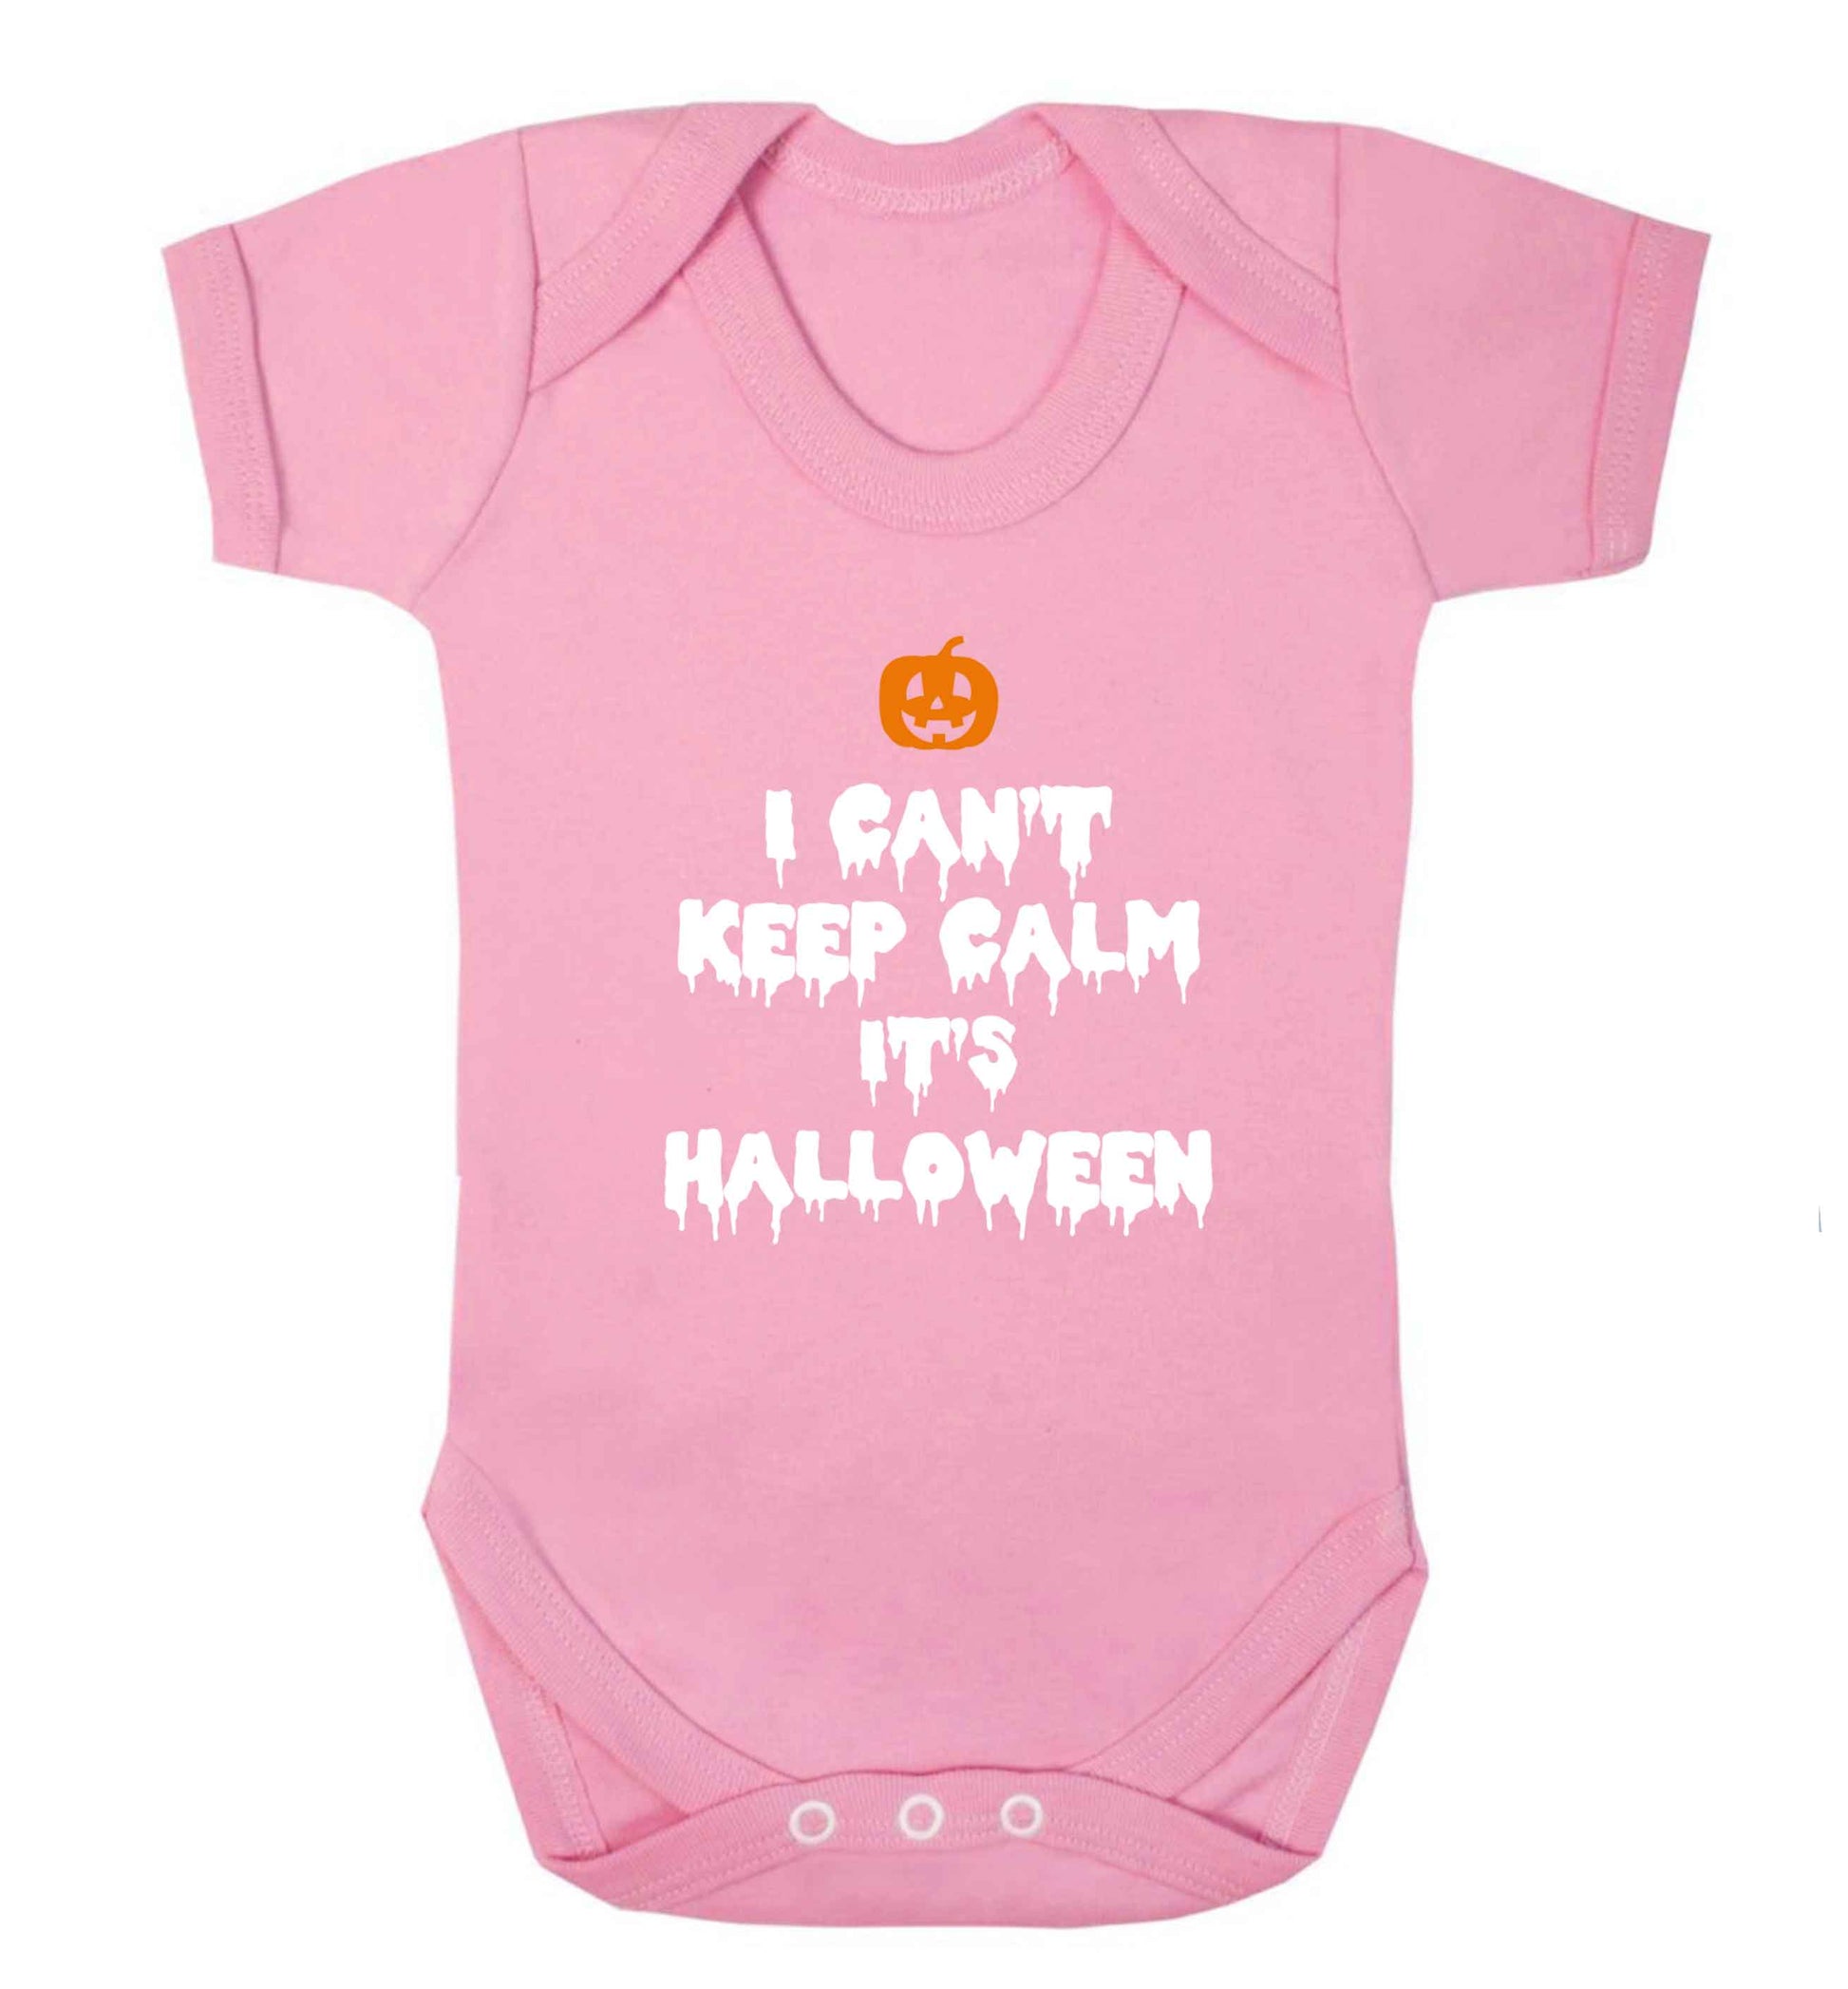 I can't keep calm it's halloween baby vest pale pink 18-24 months